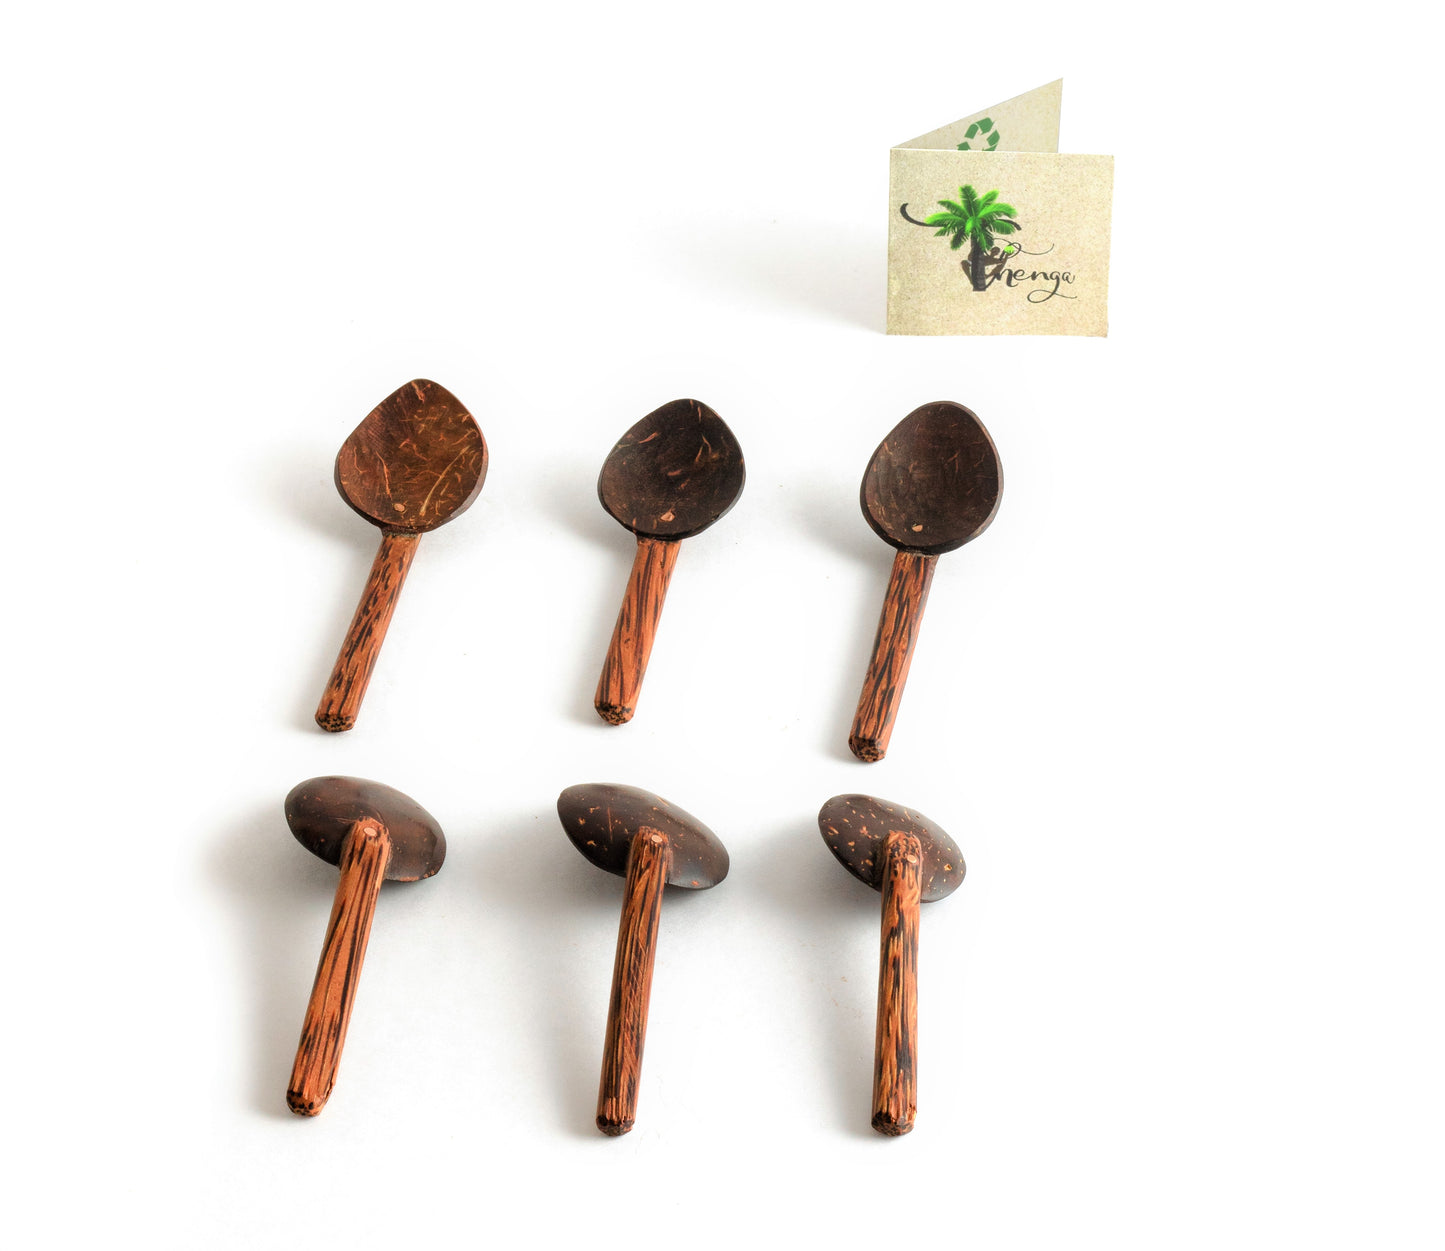 Thenga Coconut Shell Masala Spoon Set of 6 for Small Containers | Handmade & Eco-Friendly | for Tea, Coffee, Sugar, Spices